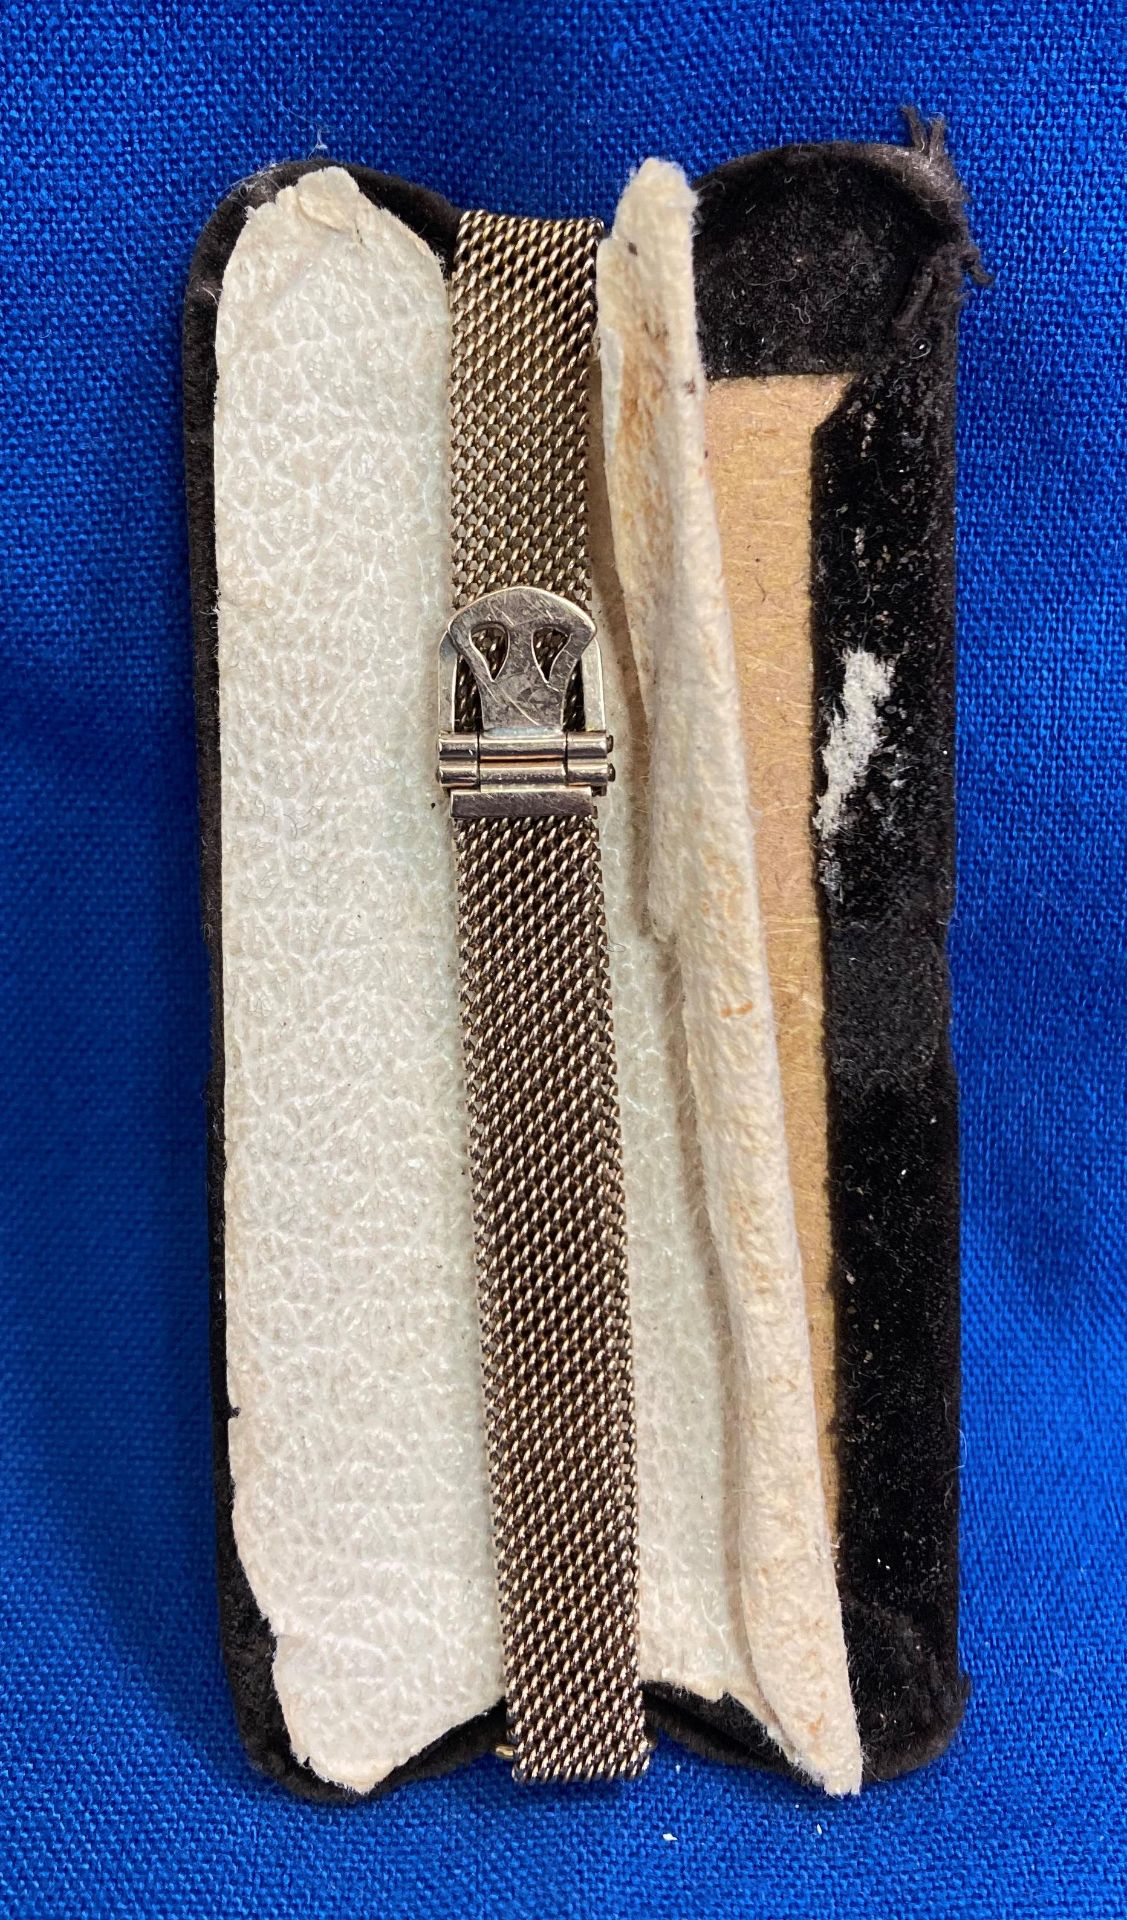 9ct gold (375) Art Deco watch with a 9ct gold chain-link strap in fitted case by Goldsmith & - Image 2 of 7